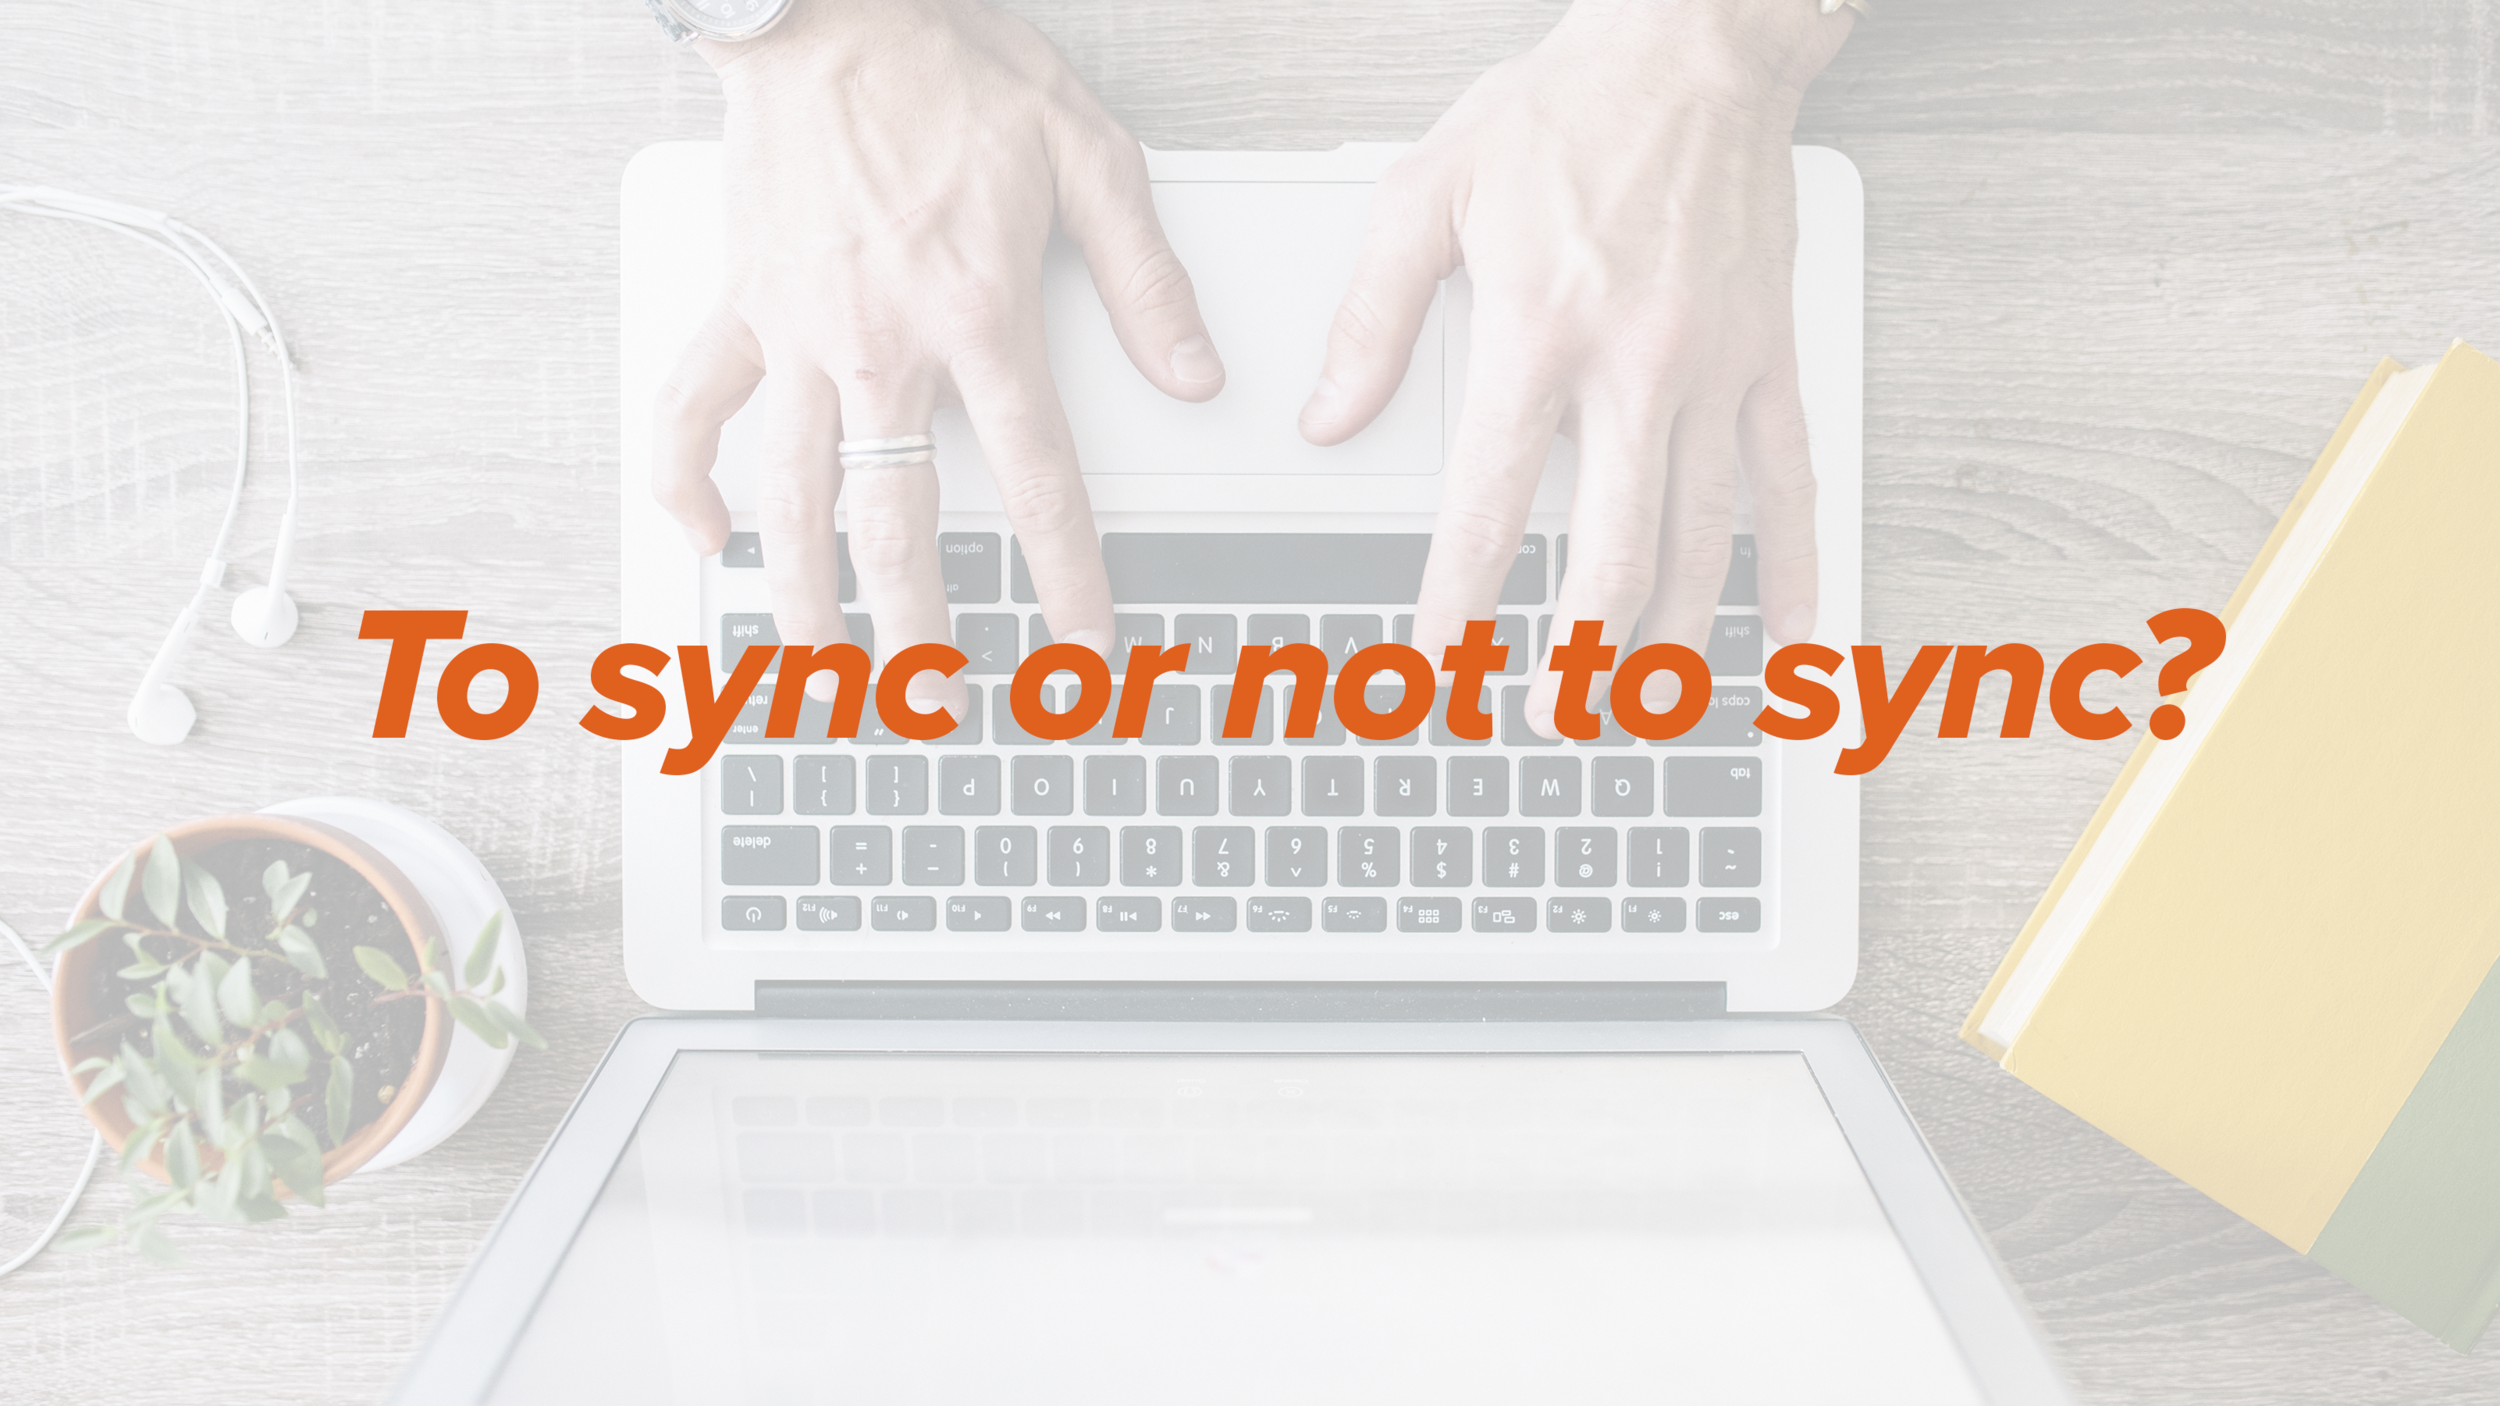 sync meaning